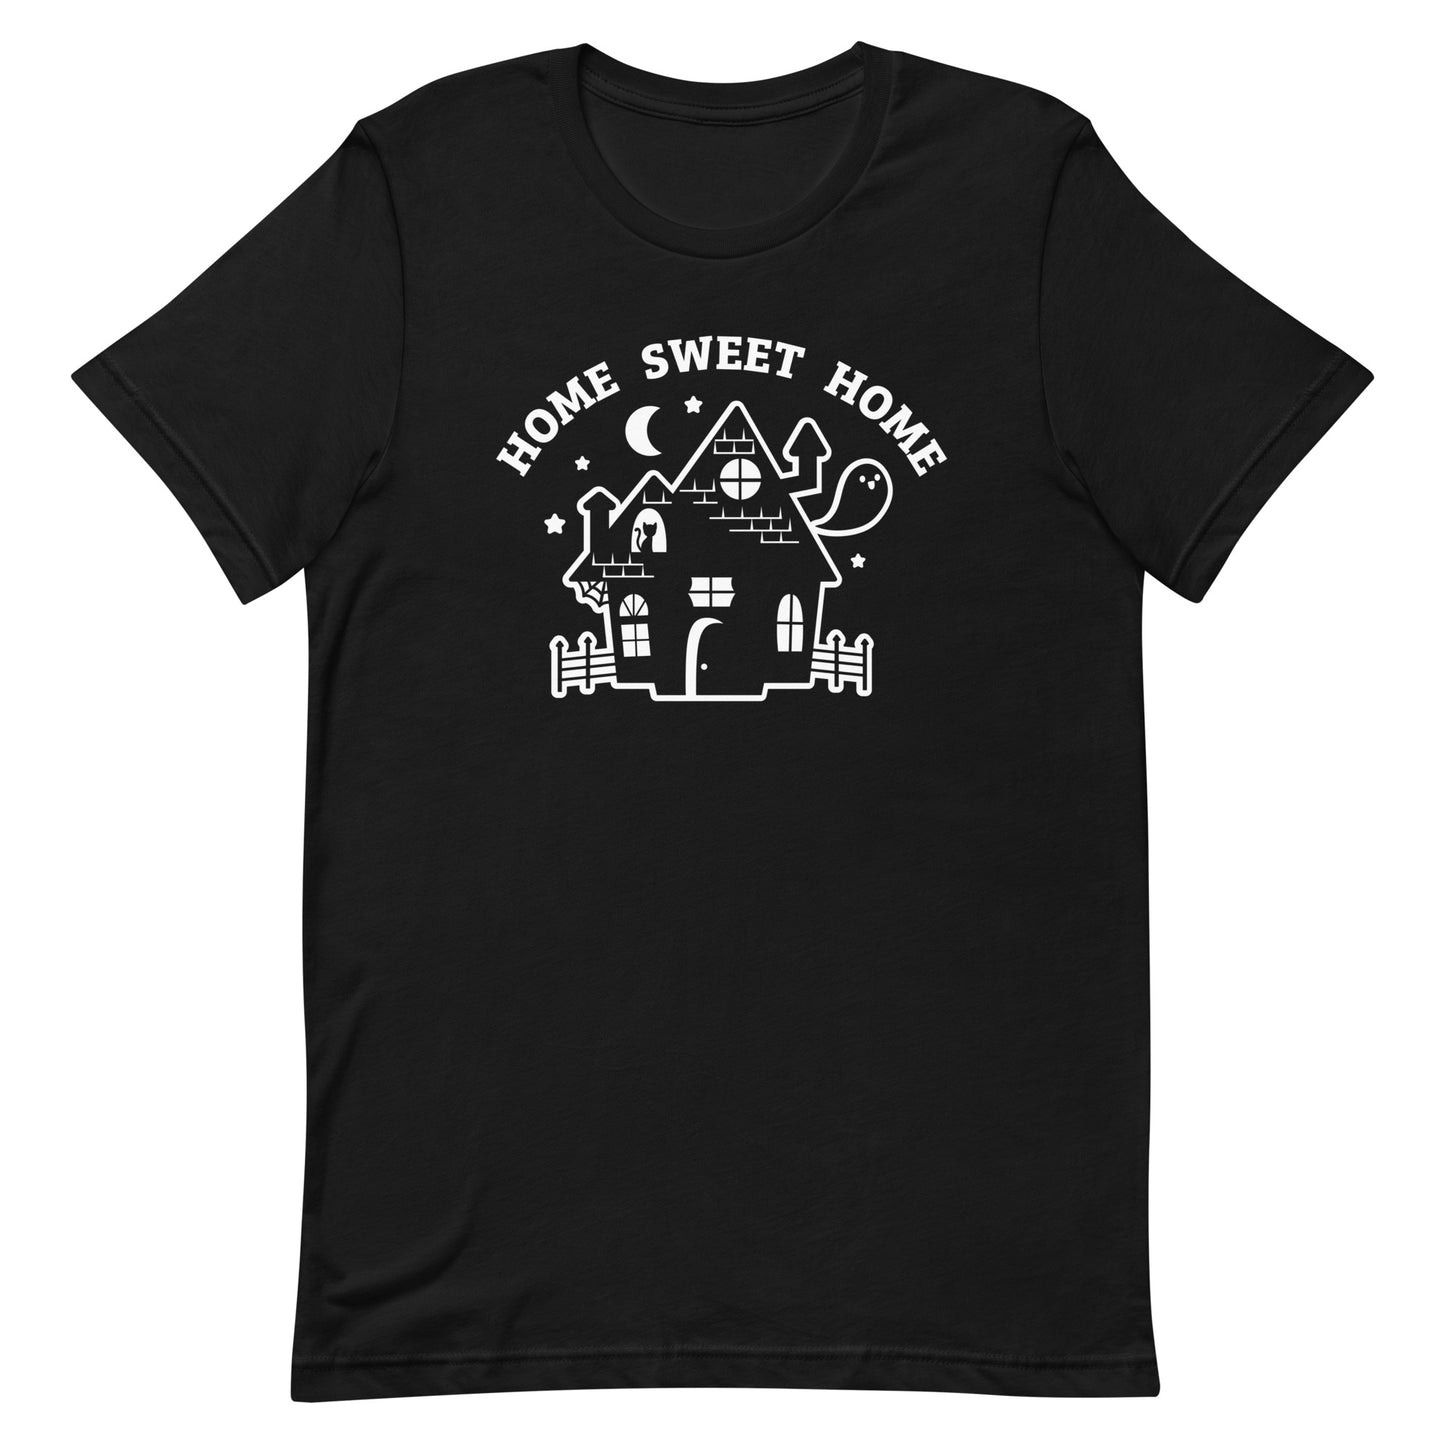 A black crewneck t-shirt featuring a single-color illustration of a haunted house. Text above the house reads "HOME SWEET HOME".